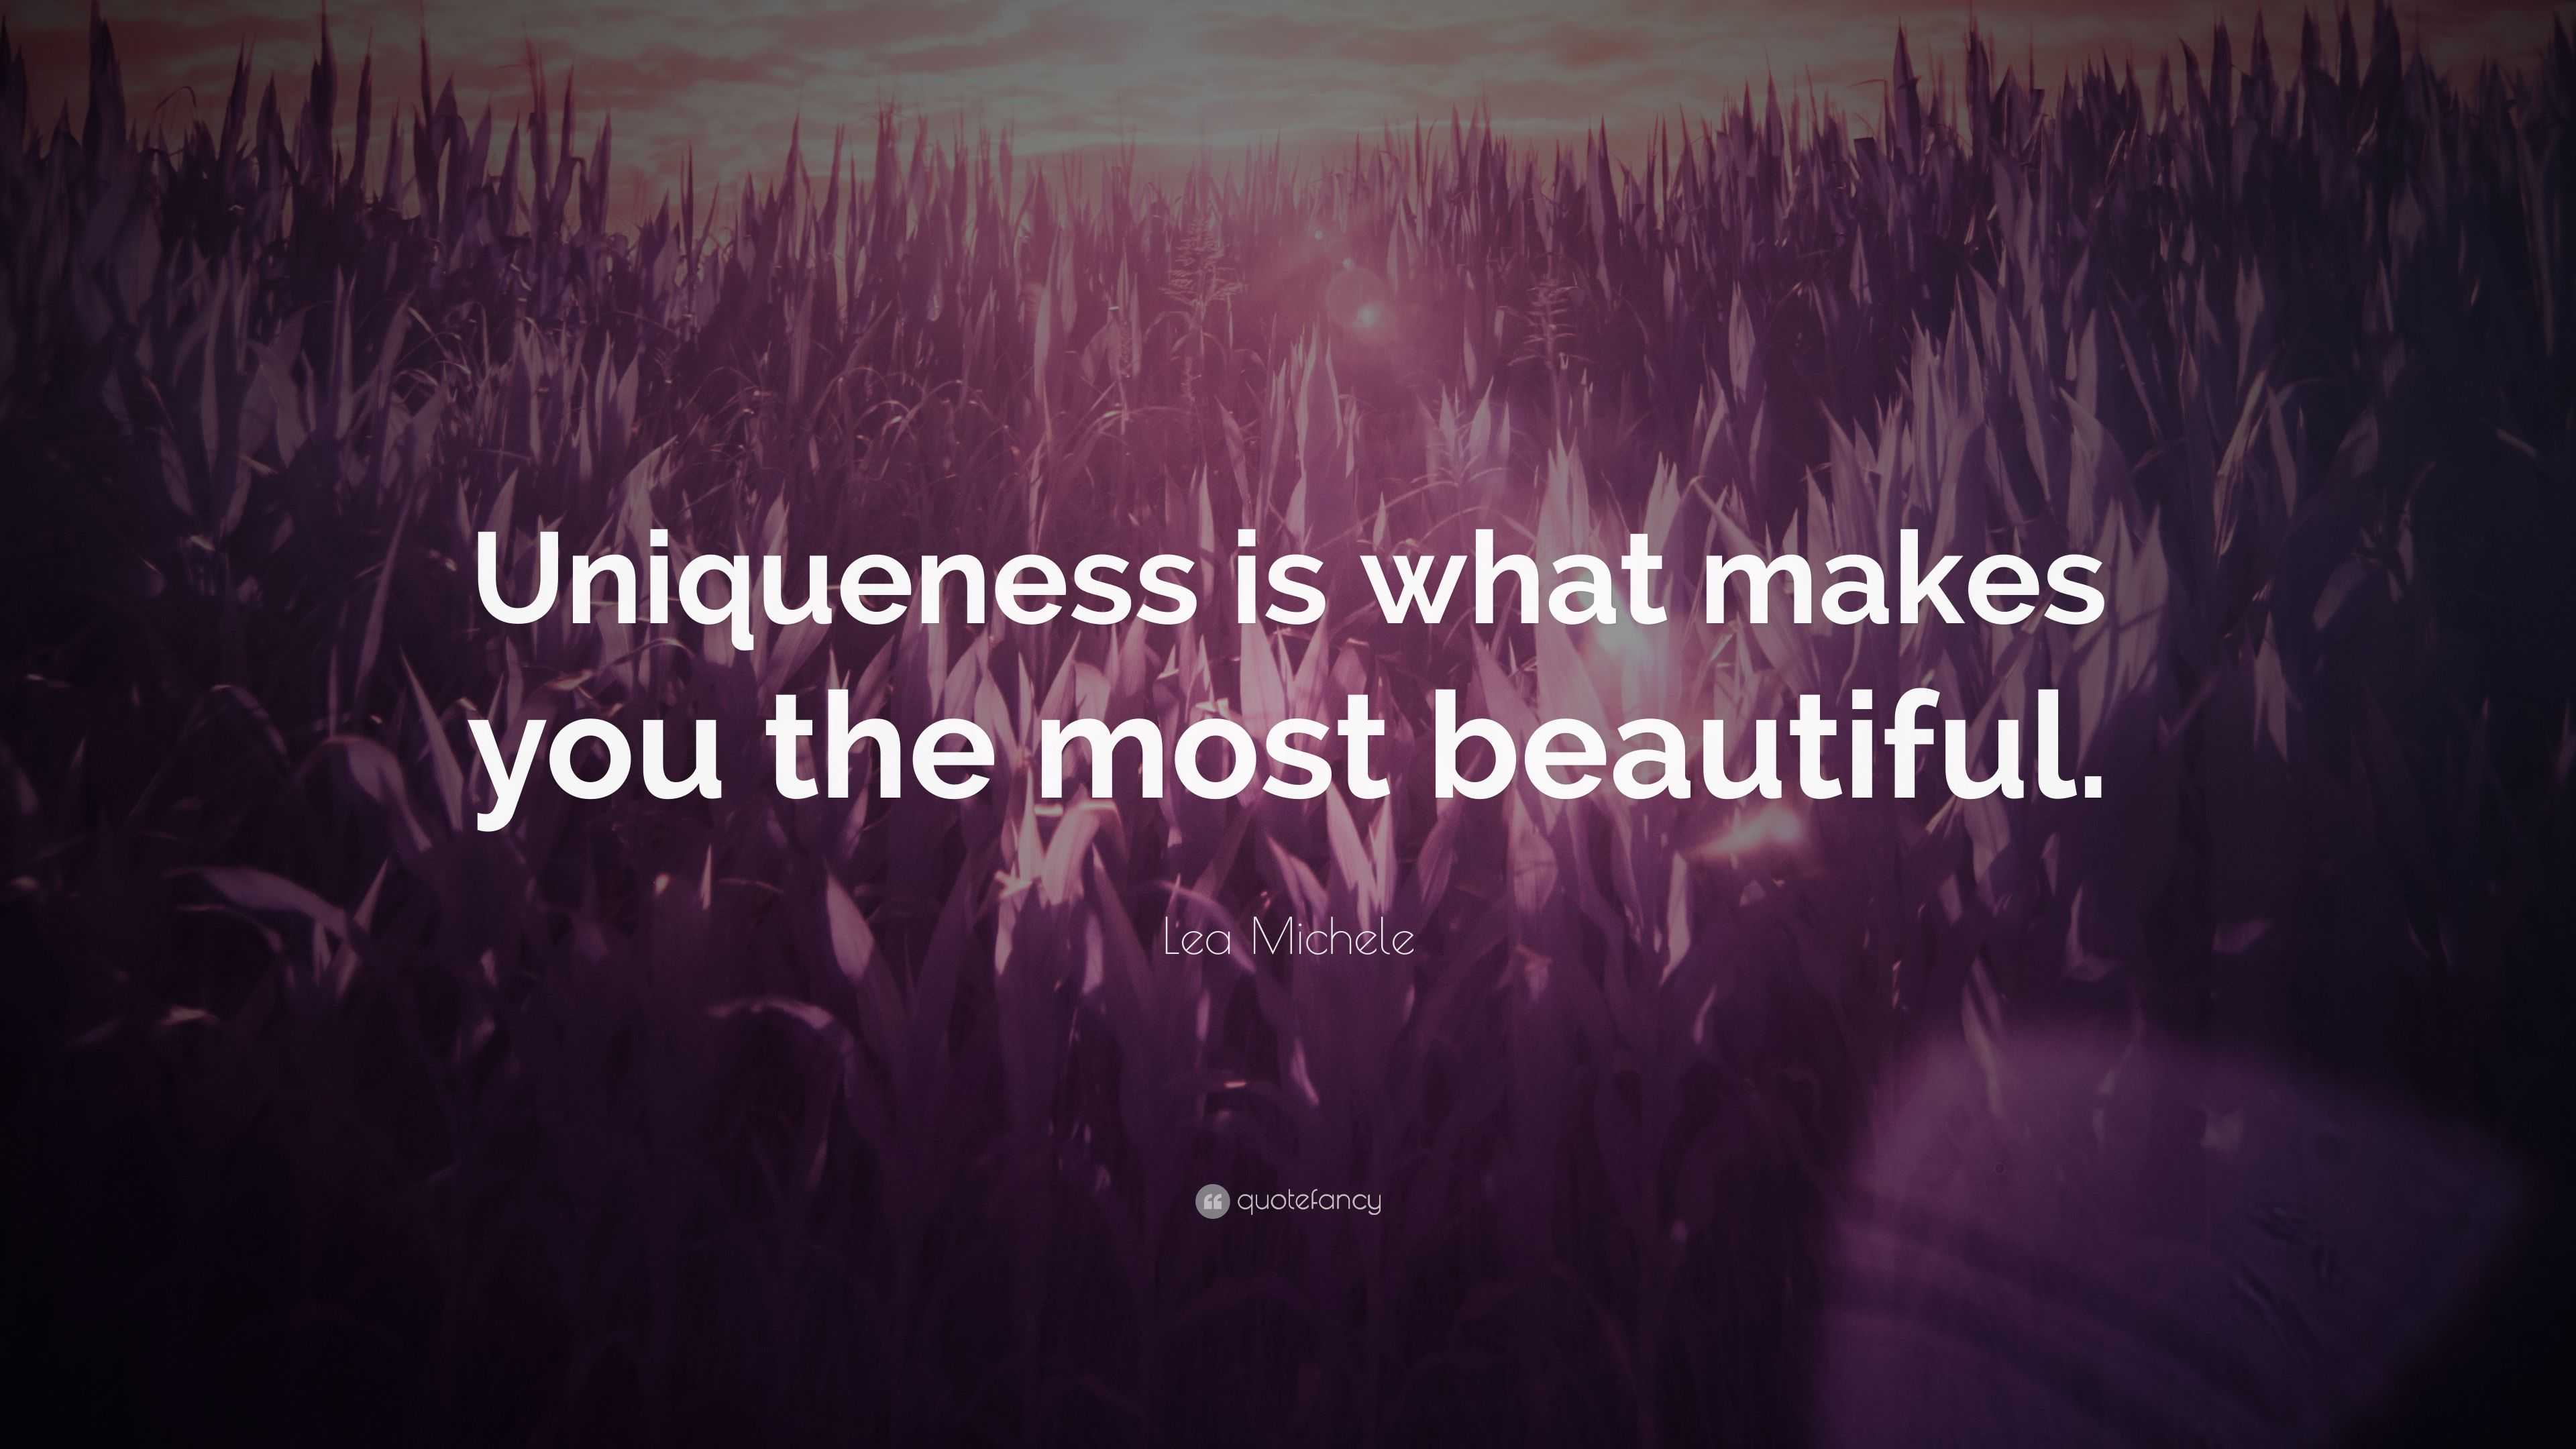 Lea Michele Quote: “Uniqueness is what makes you the most beautiful.”